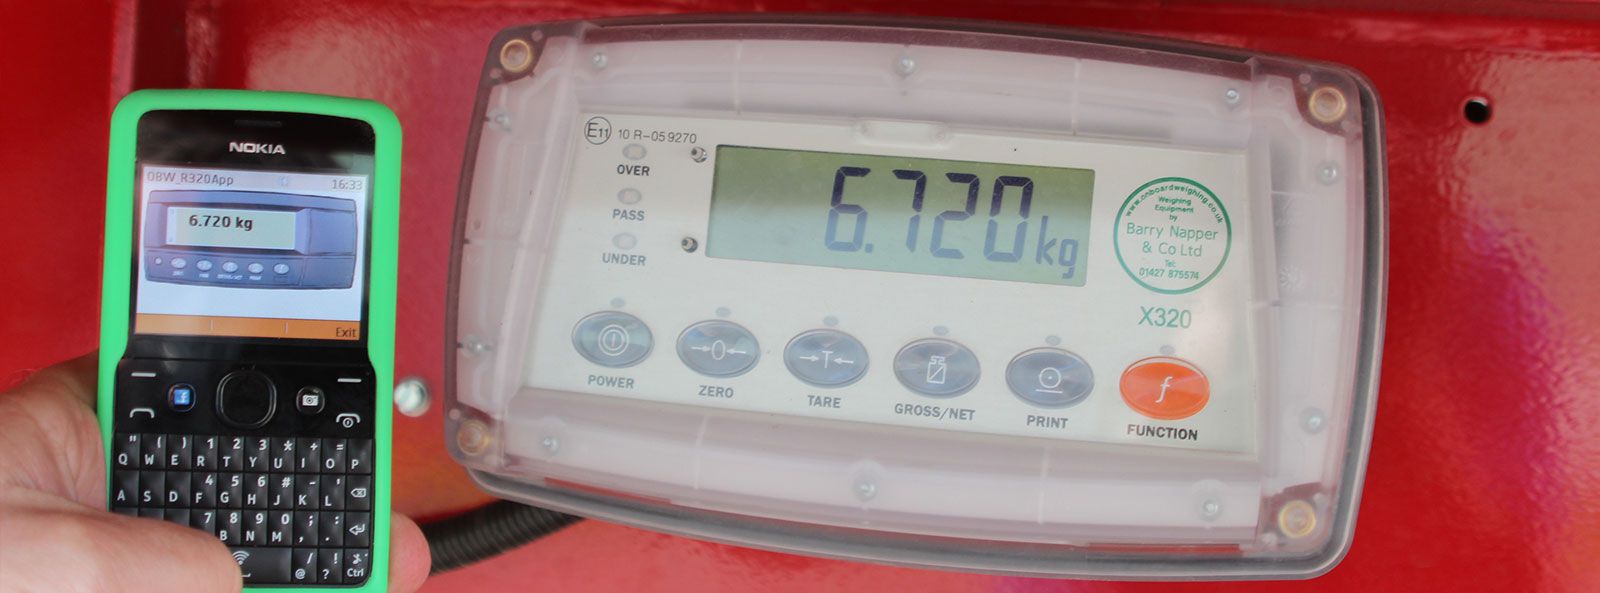 Bluetooth onboard weighing system display and mobile phone